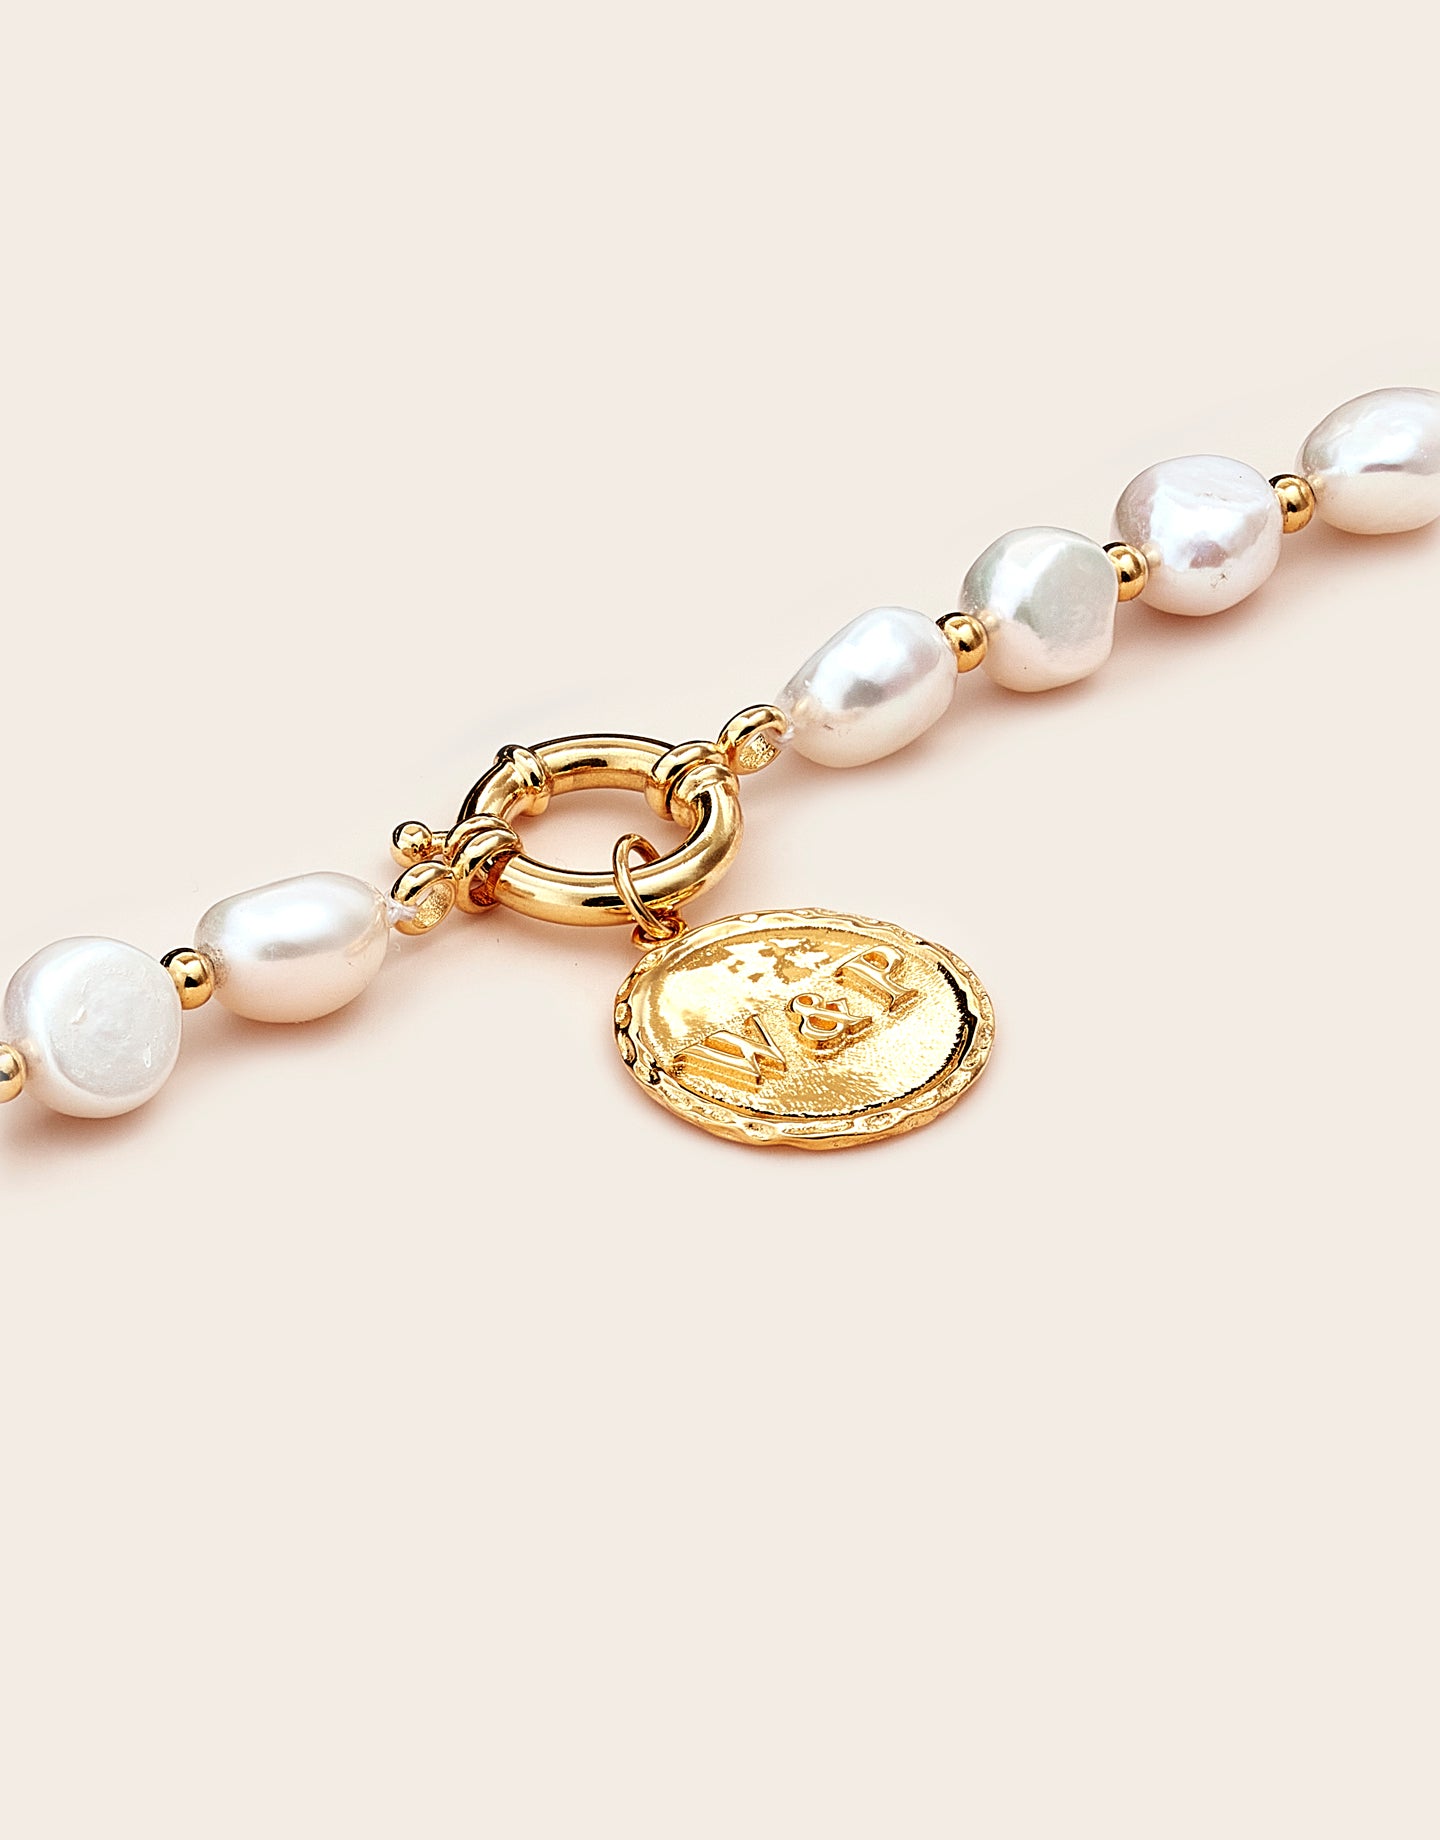 High Country Pearl Bracelet W&P charm